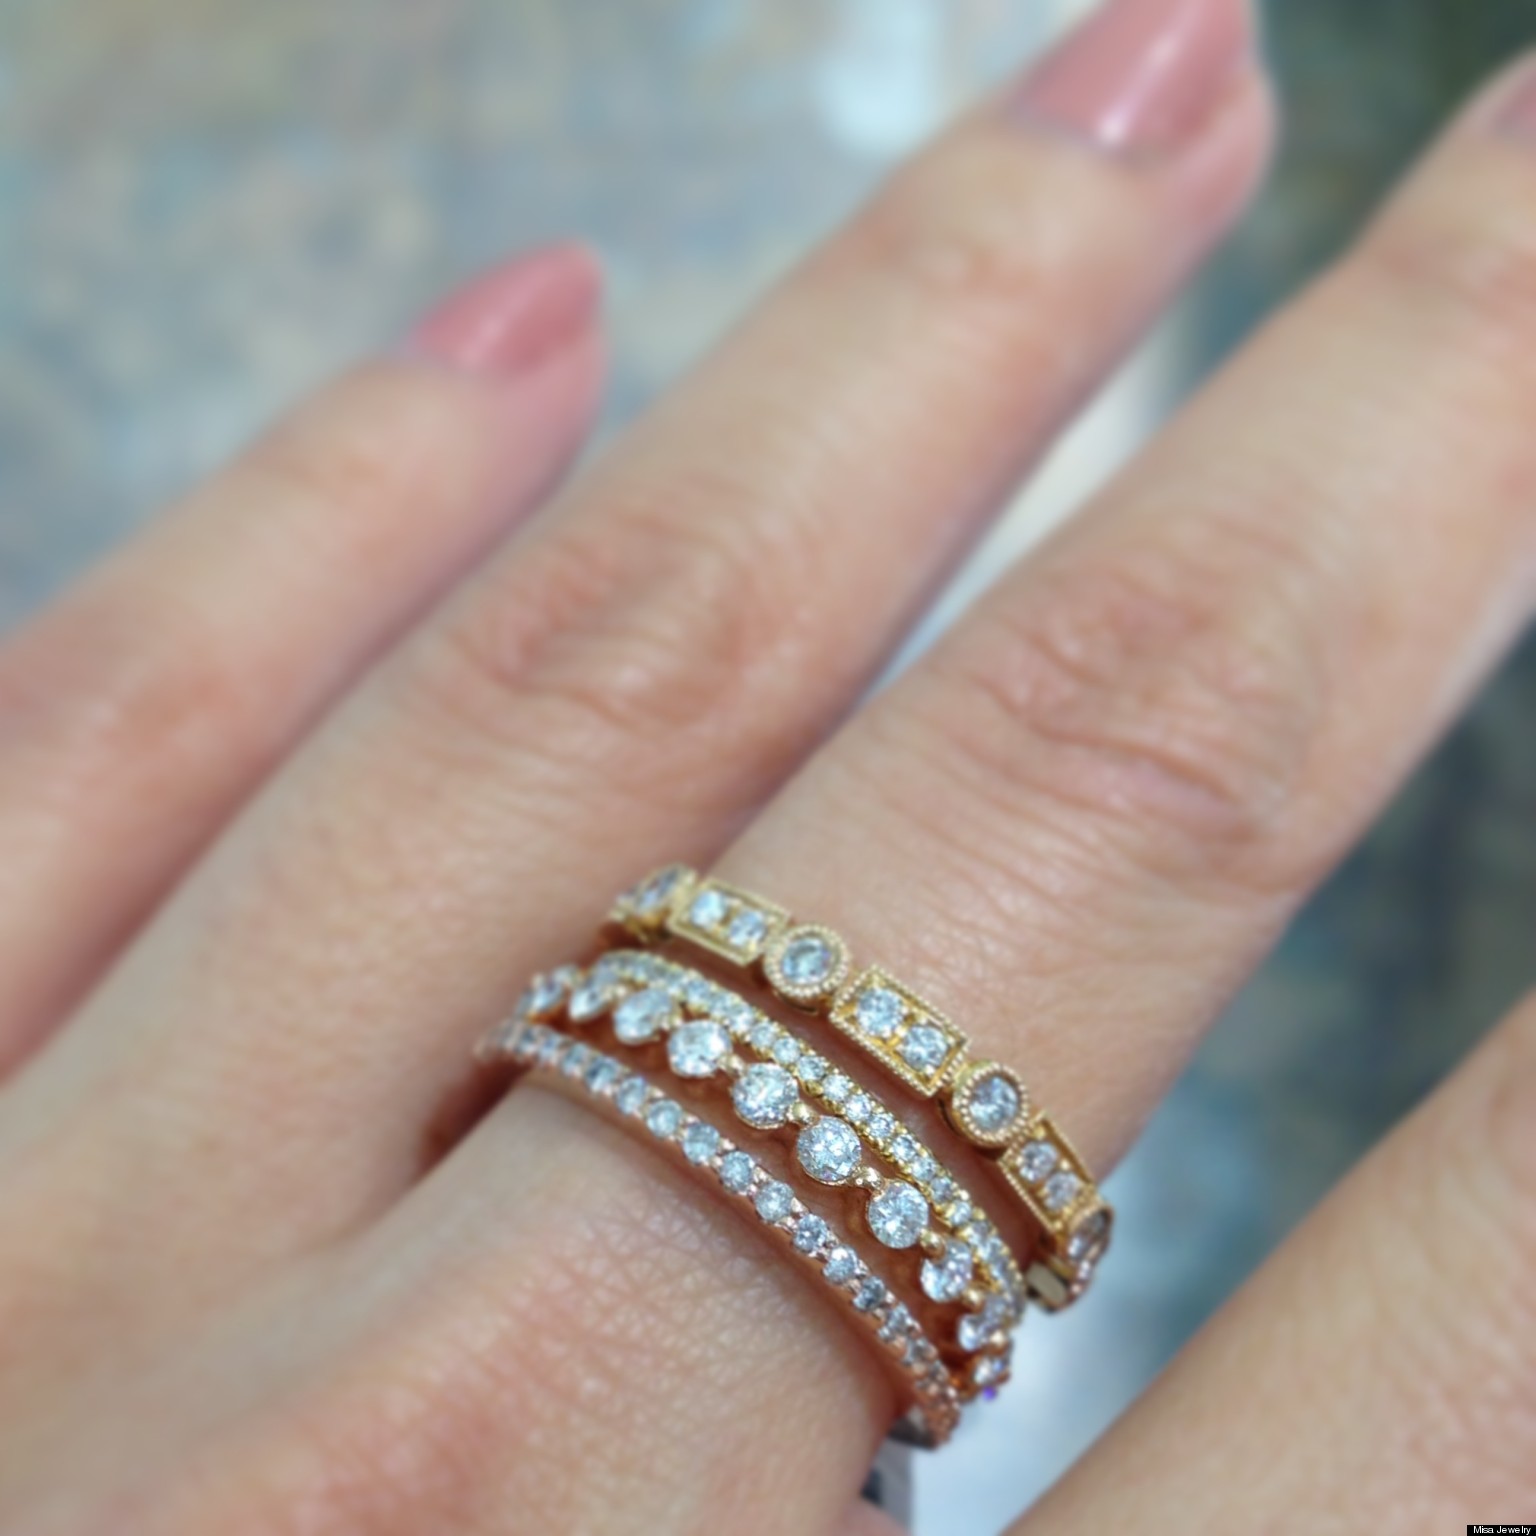 Stackable Wedding Bands Are One Of Our Favorite Jewelry